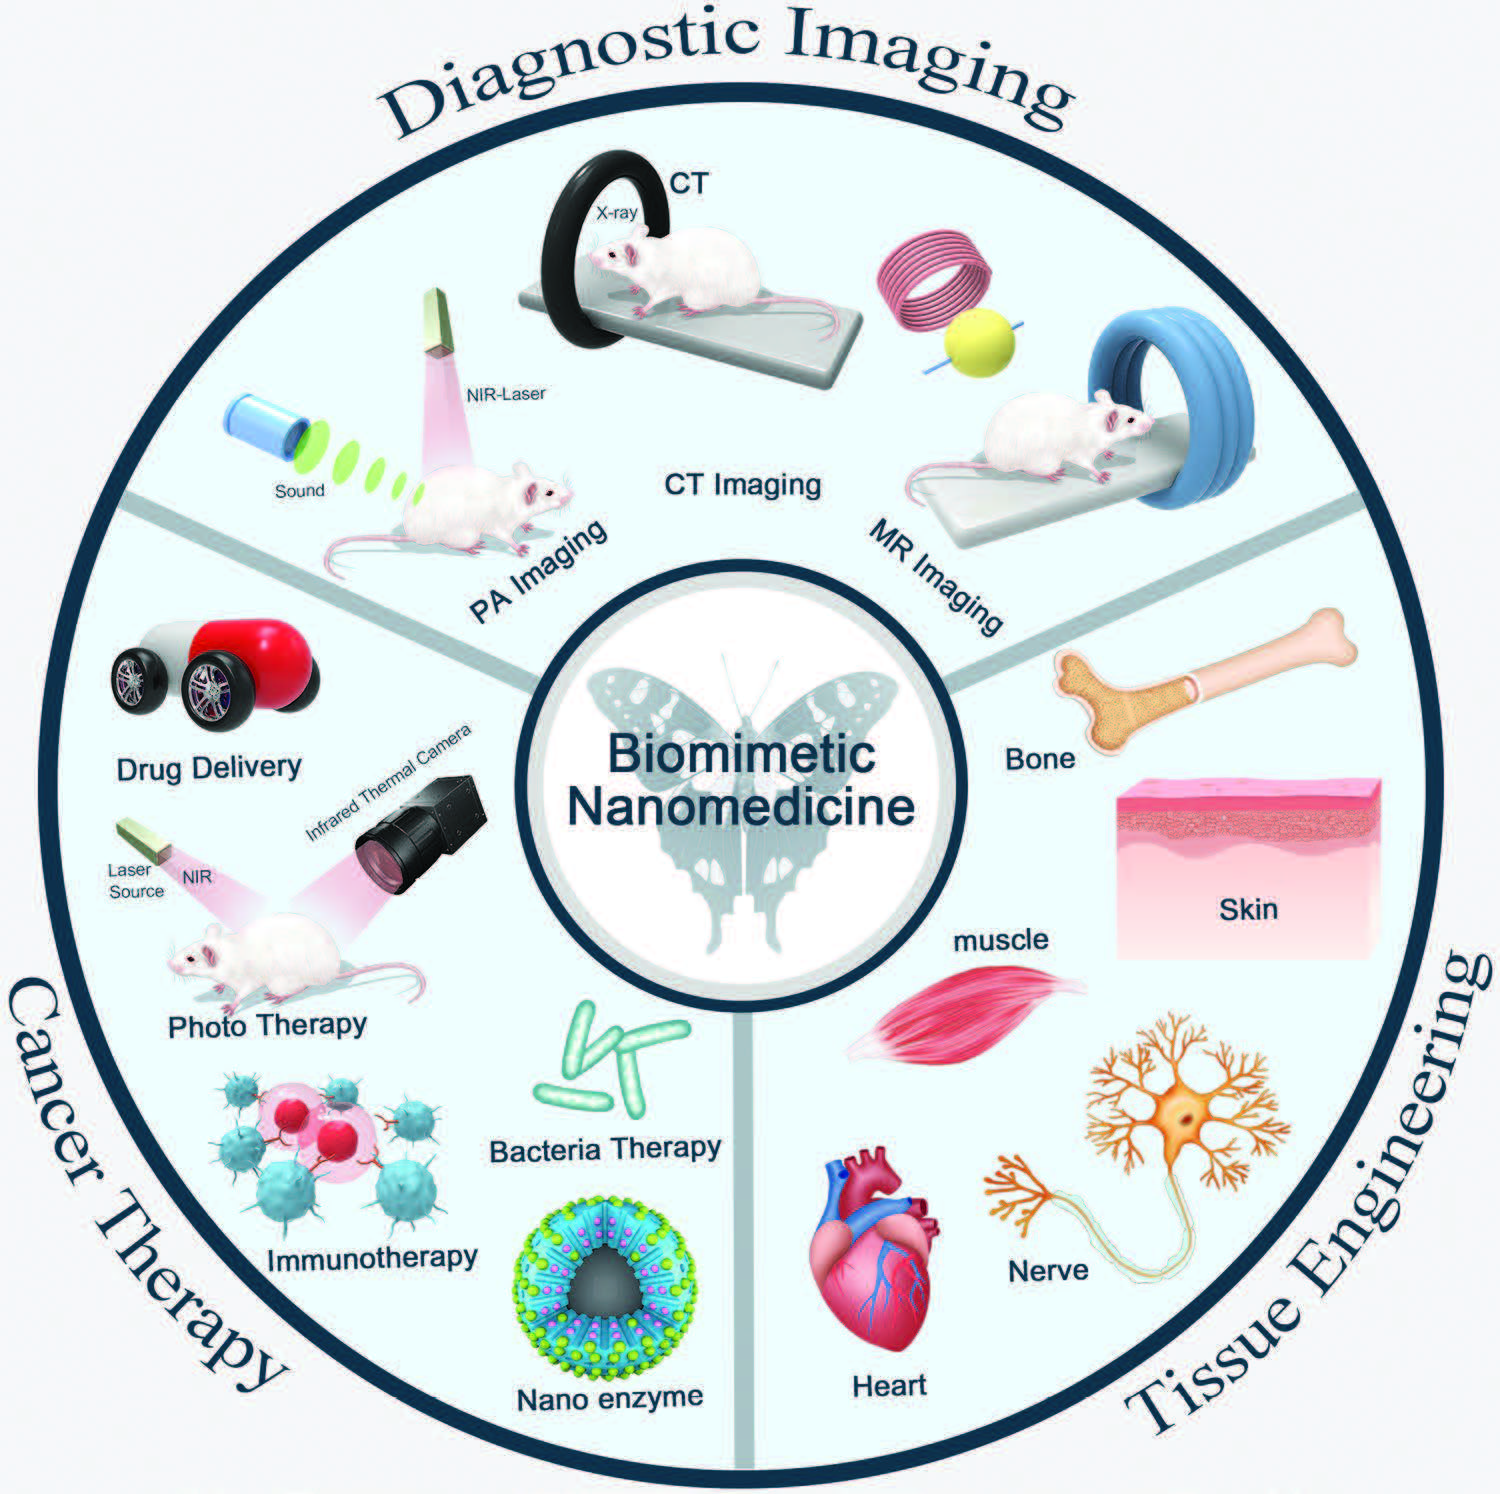 Schematic illustration of nanobiomimetic medicine in diagnostic imaging, cancer therapy, and tissue engineering